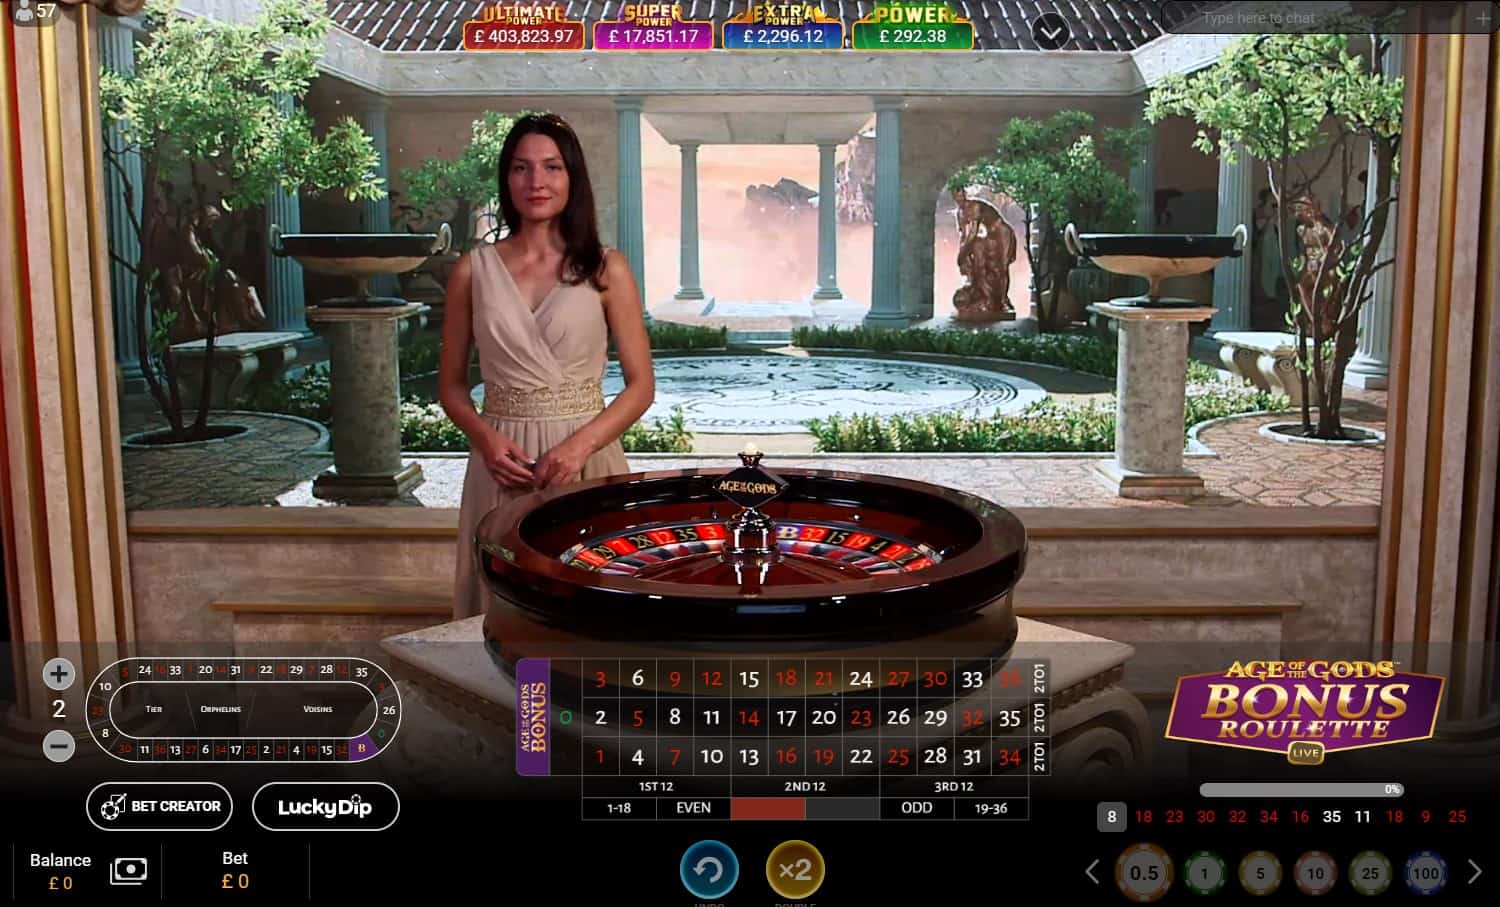 Age of The Gods Bonus Roulette Live by Playtech at The Sun Vegas